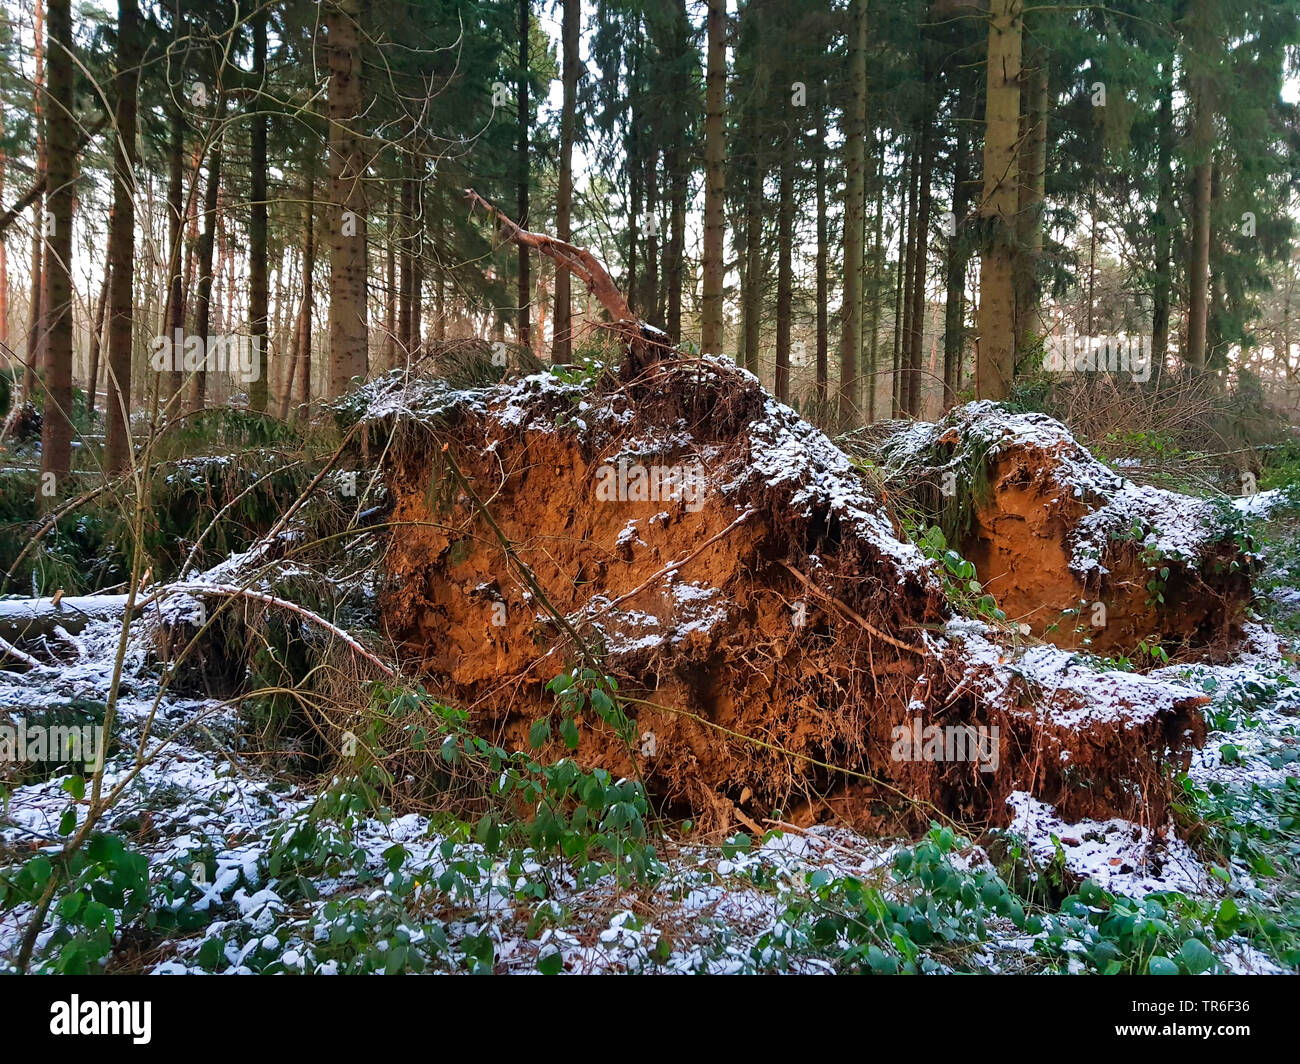 Norway spruce (Picea abies), fallen trunk after a storm in winter, Germany, North Rhine-Westphalia Stock Photo